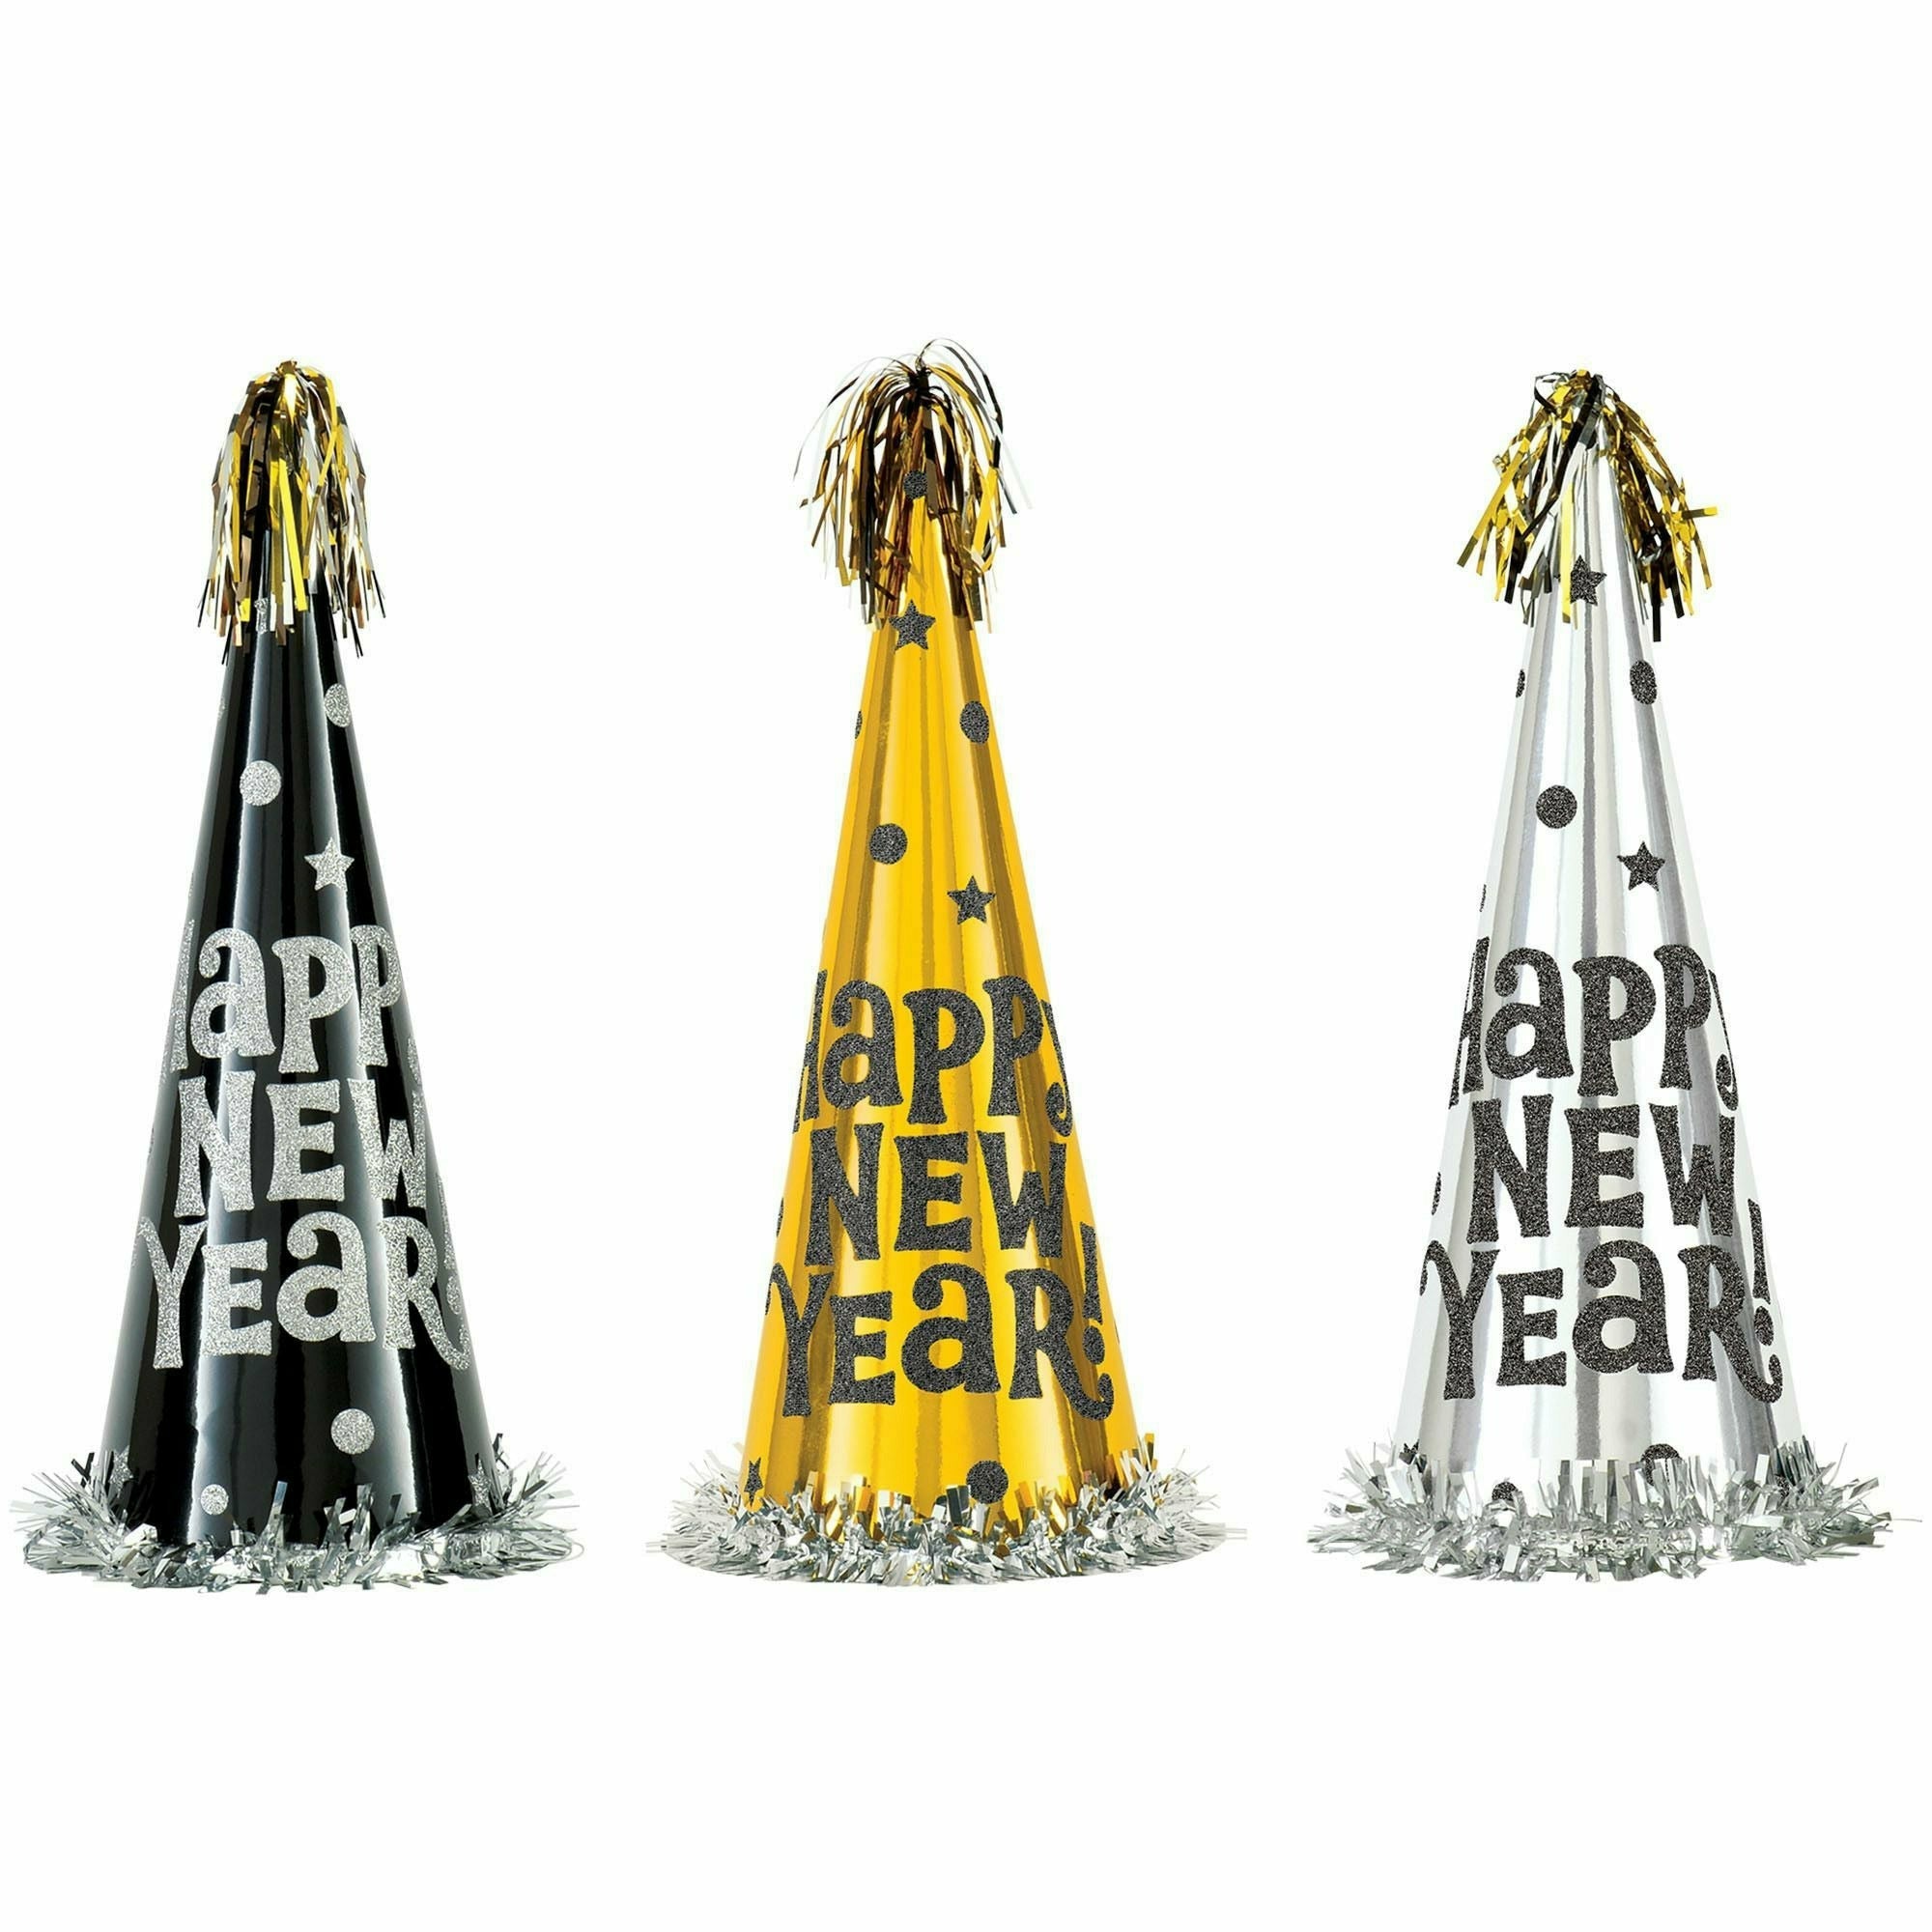 Amscan HOLIDAY: NEW YEAR'S Happy New Year Large Cone Hats Assortment